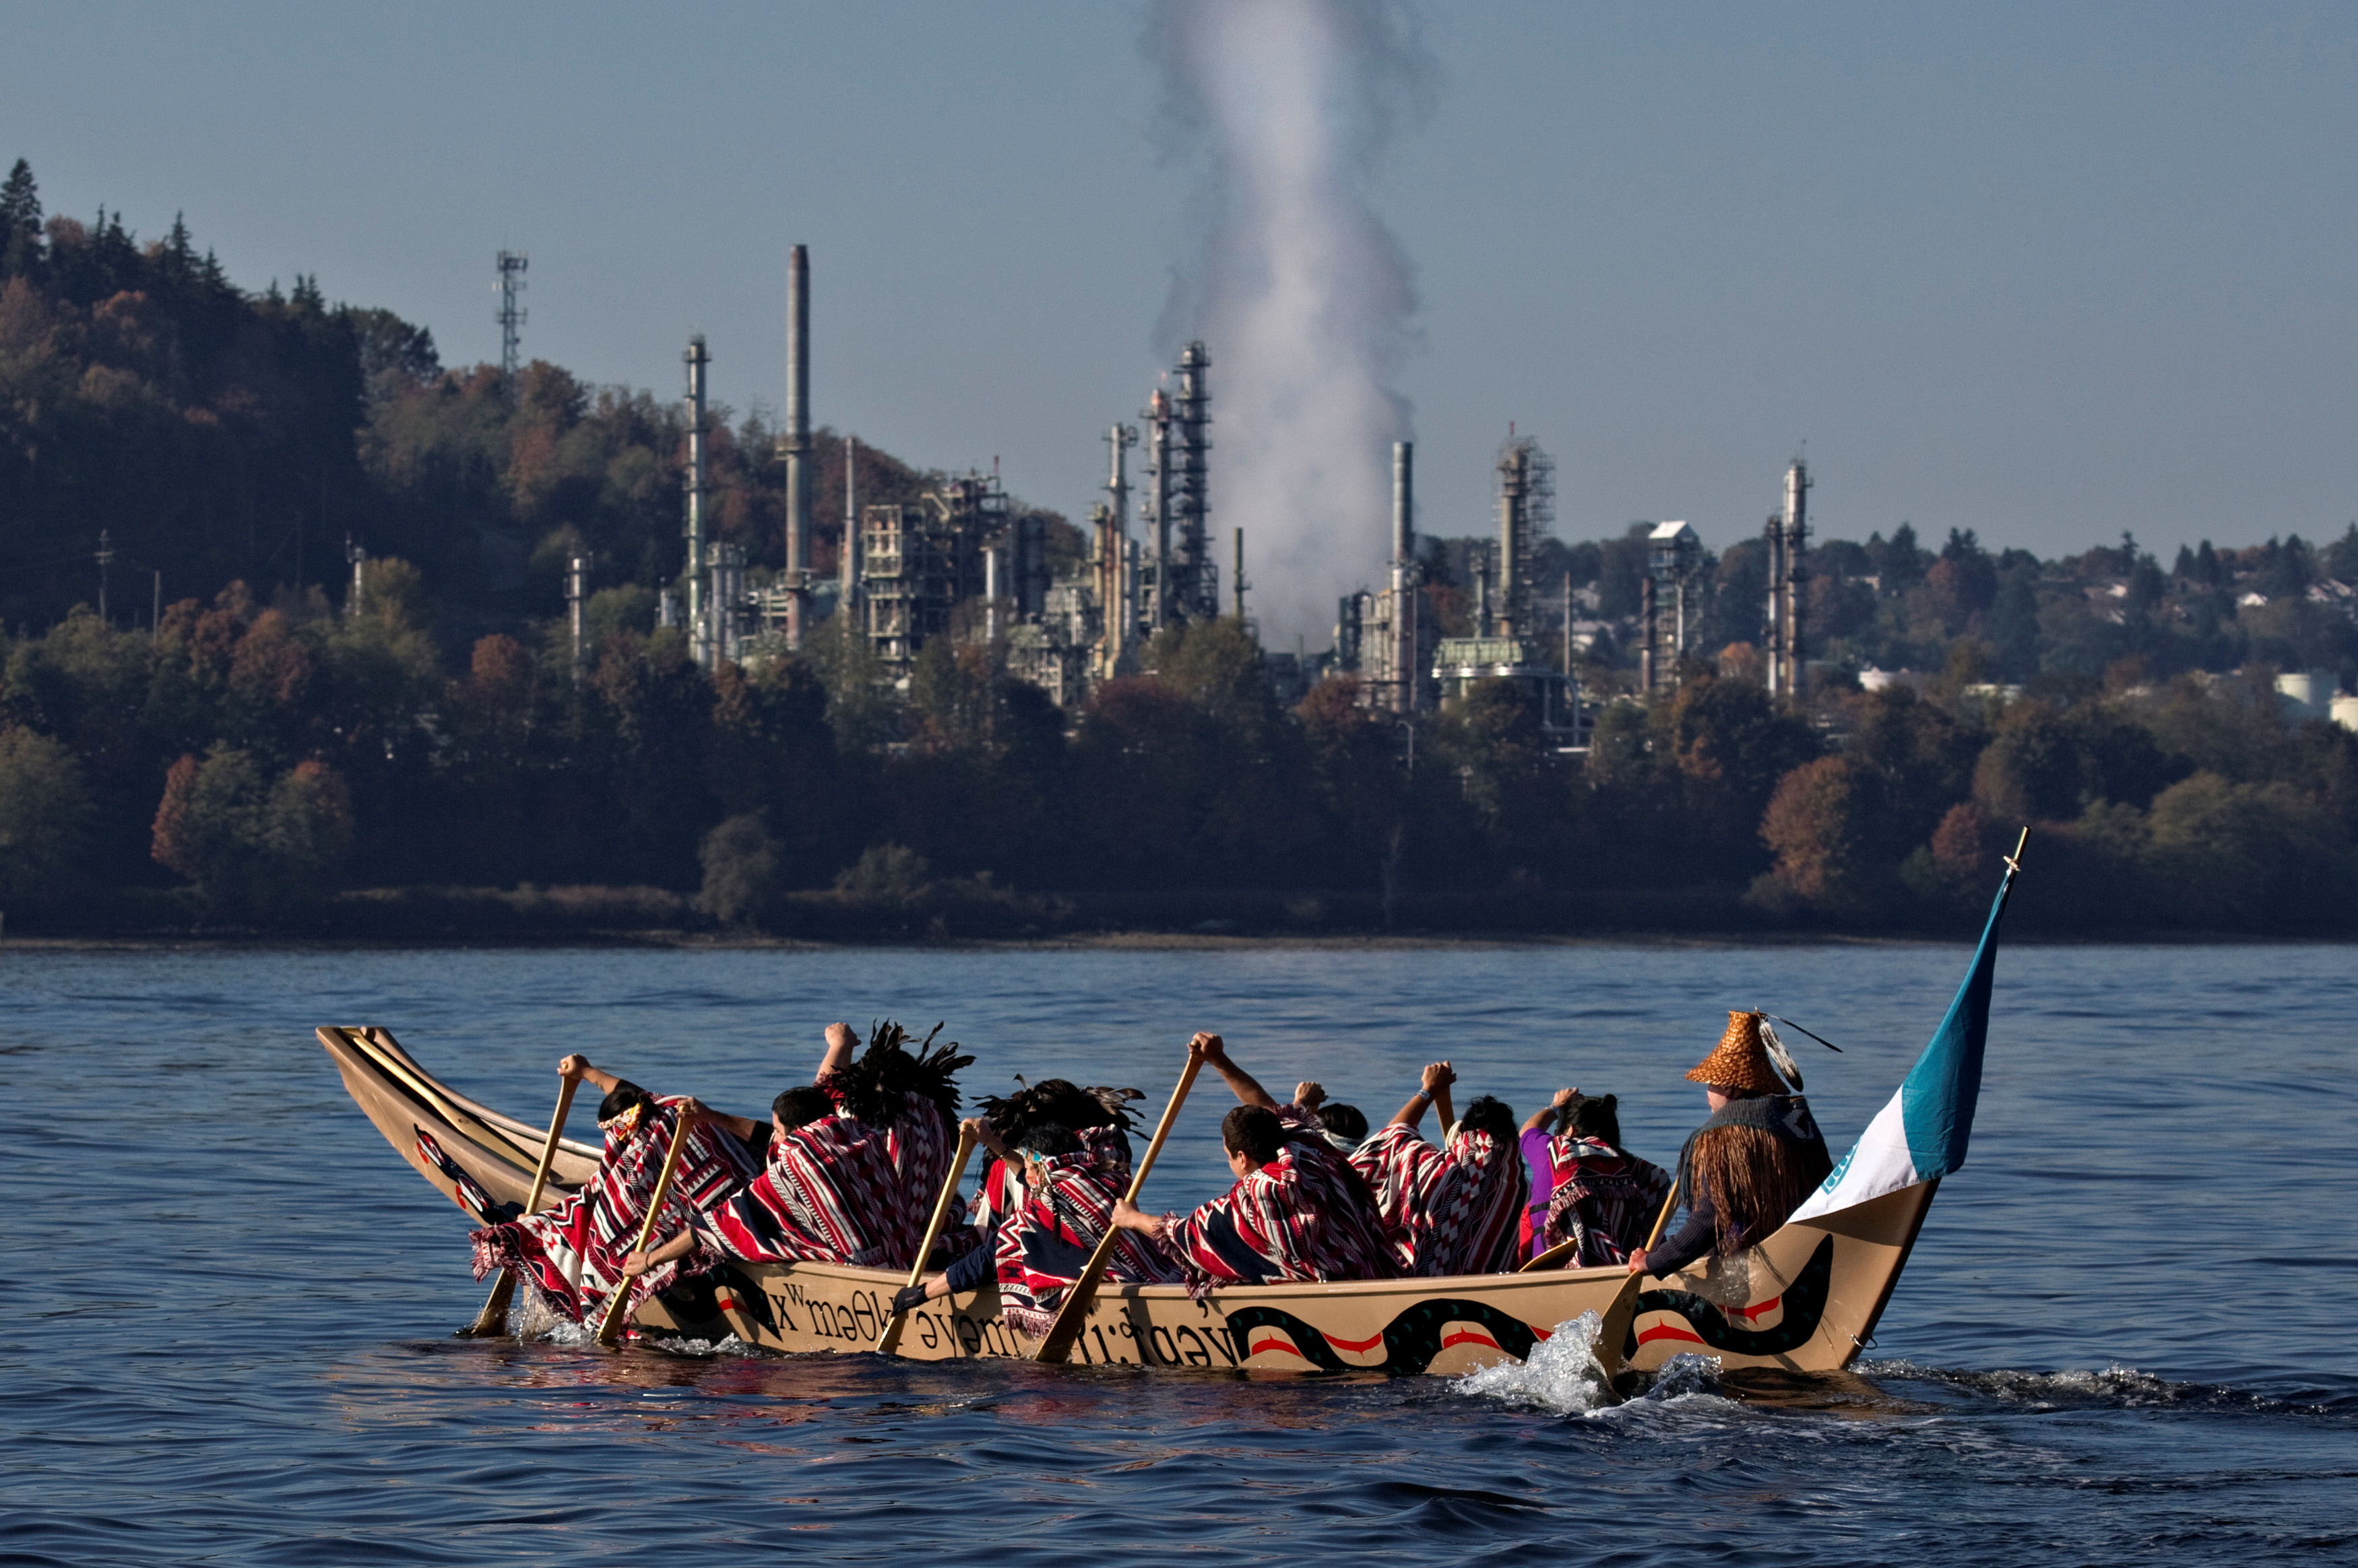 First Nation Tsleil-Waututh, Squamish and Musqueam bands paddle in a canoe during a protest in North Vancouver